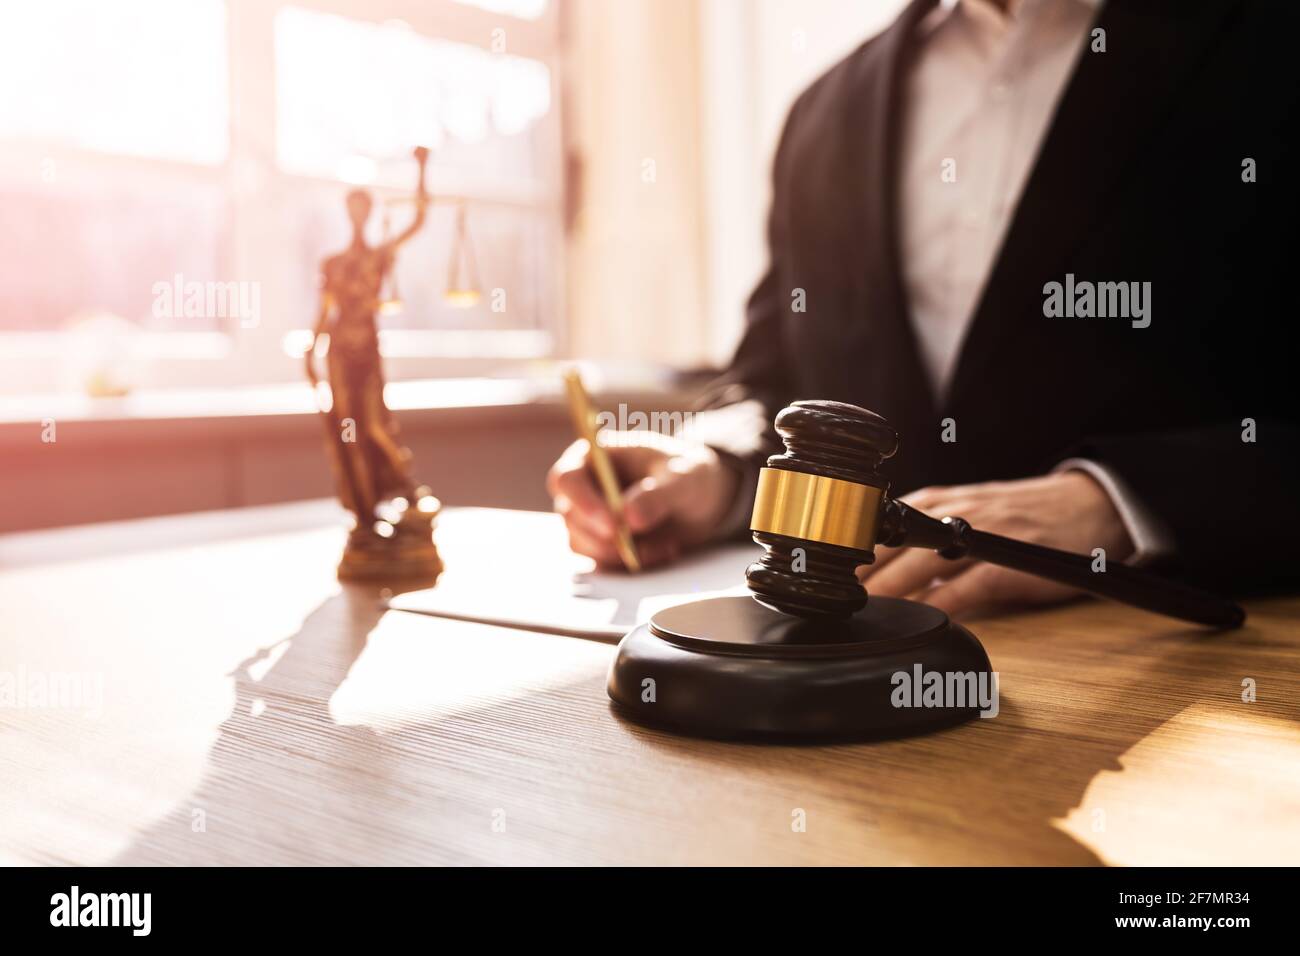 Judge With Gavel In Court Writing Legal Law Order Stock Photo